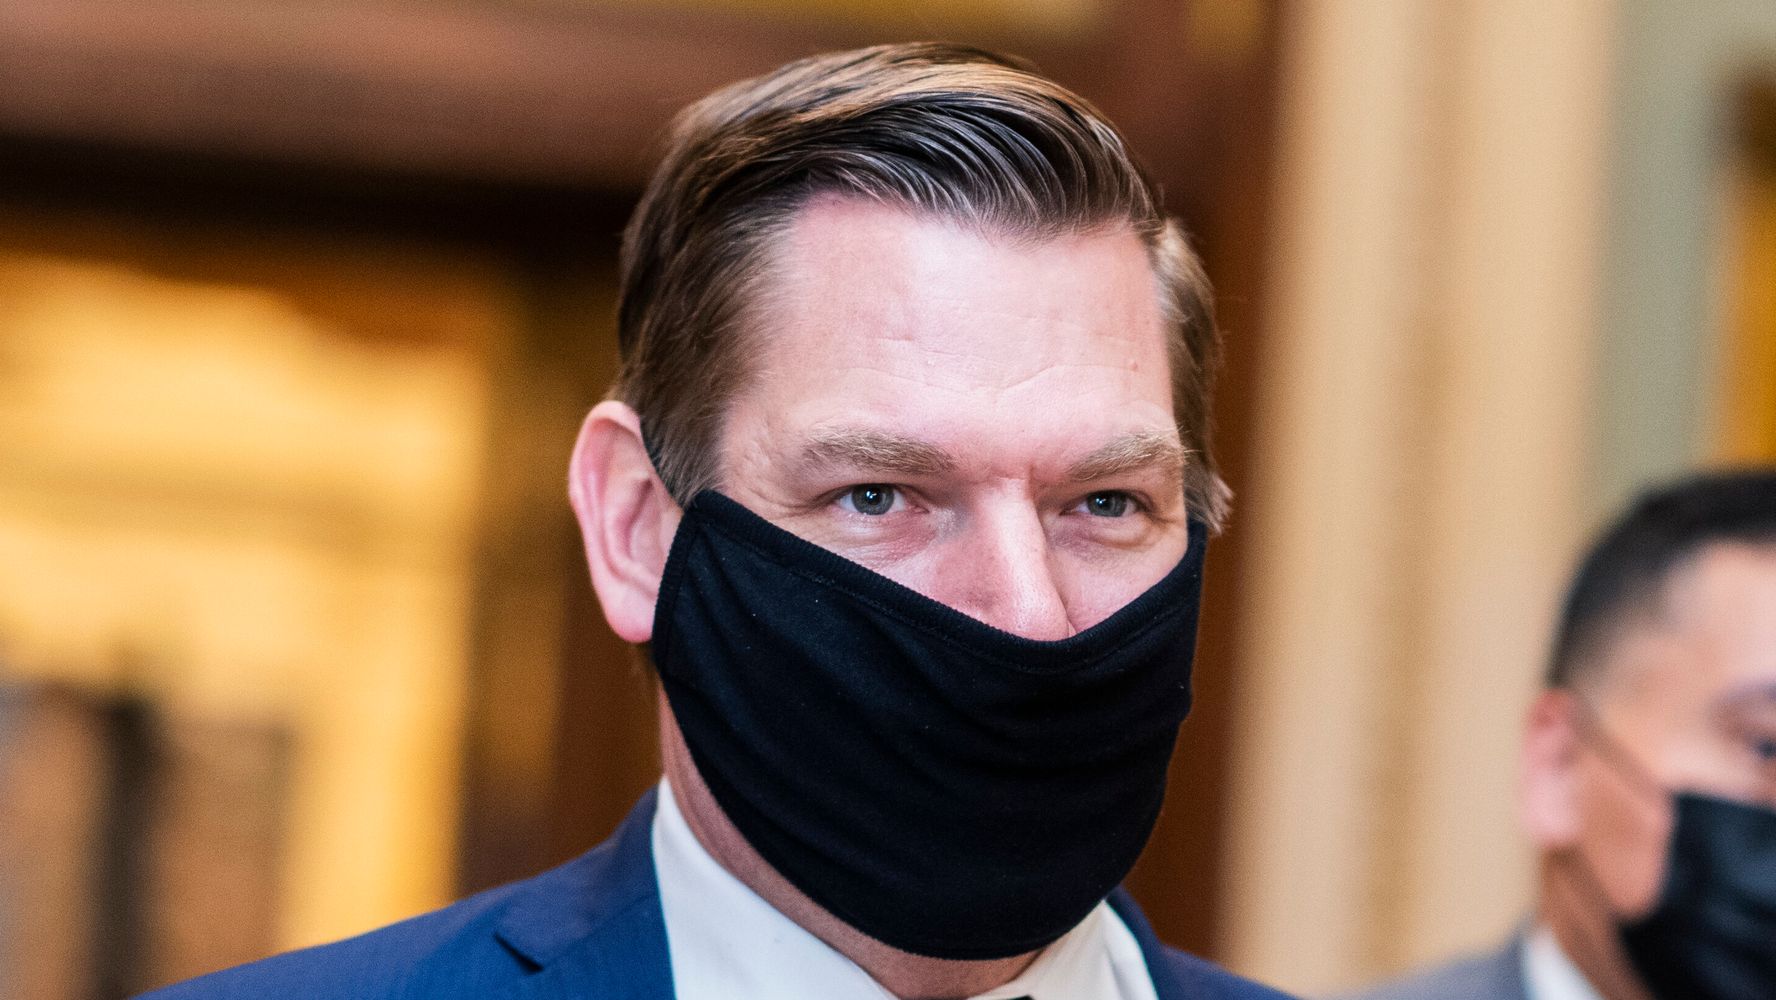 Rep. Eric Swalwell Blew His Top When Marjorie Taylor Greene's Aide Told Him To Remove Mask